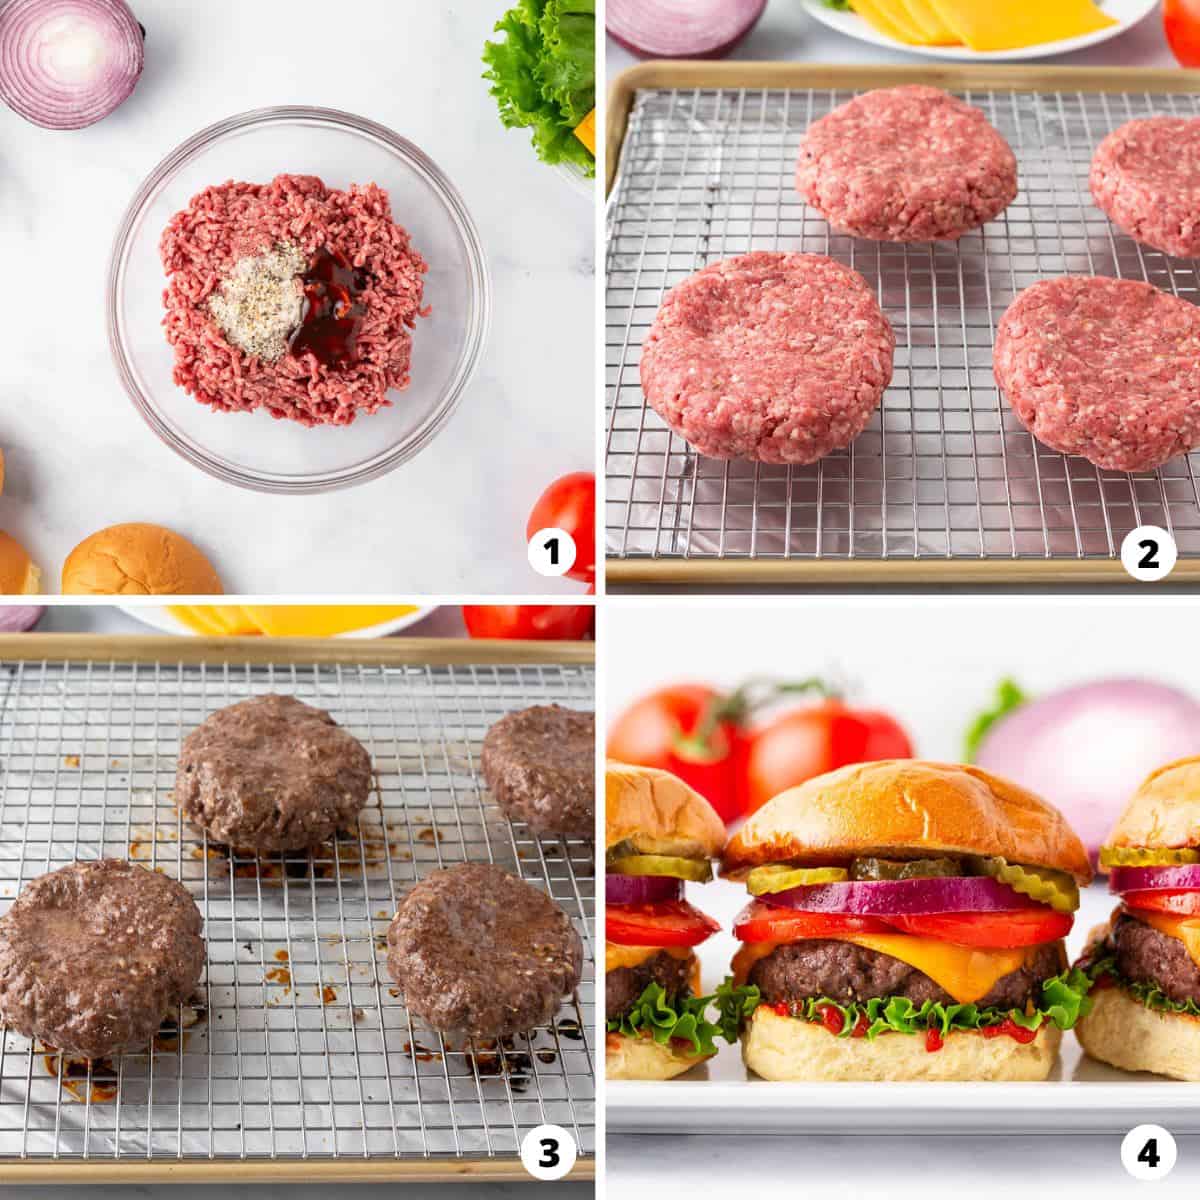 Showing how to bake hamburgers in a 4 step collage. 